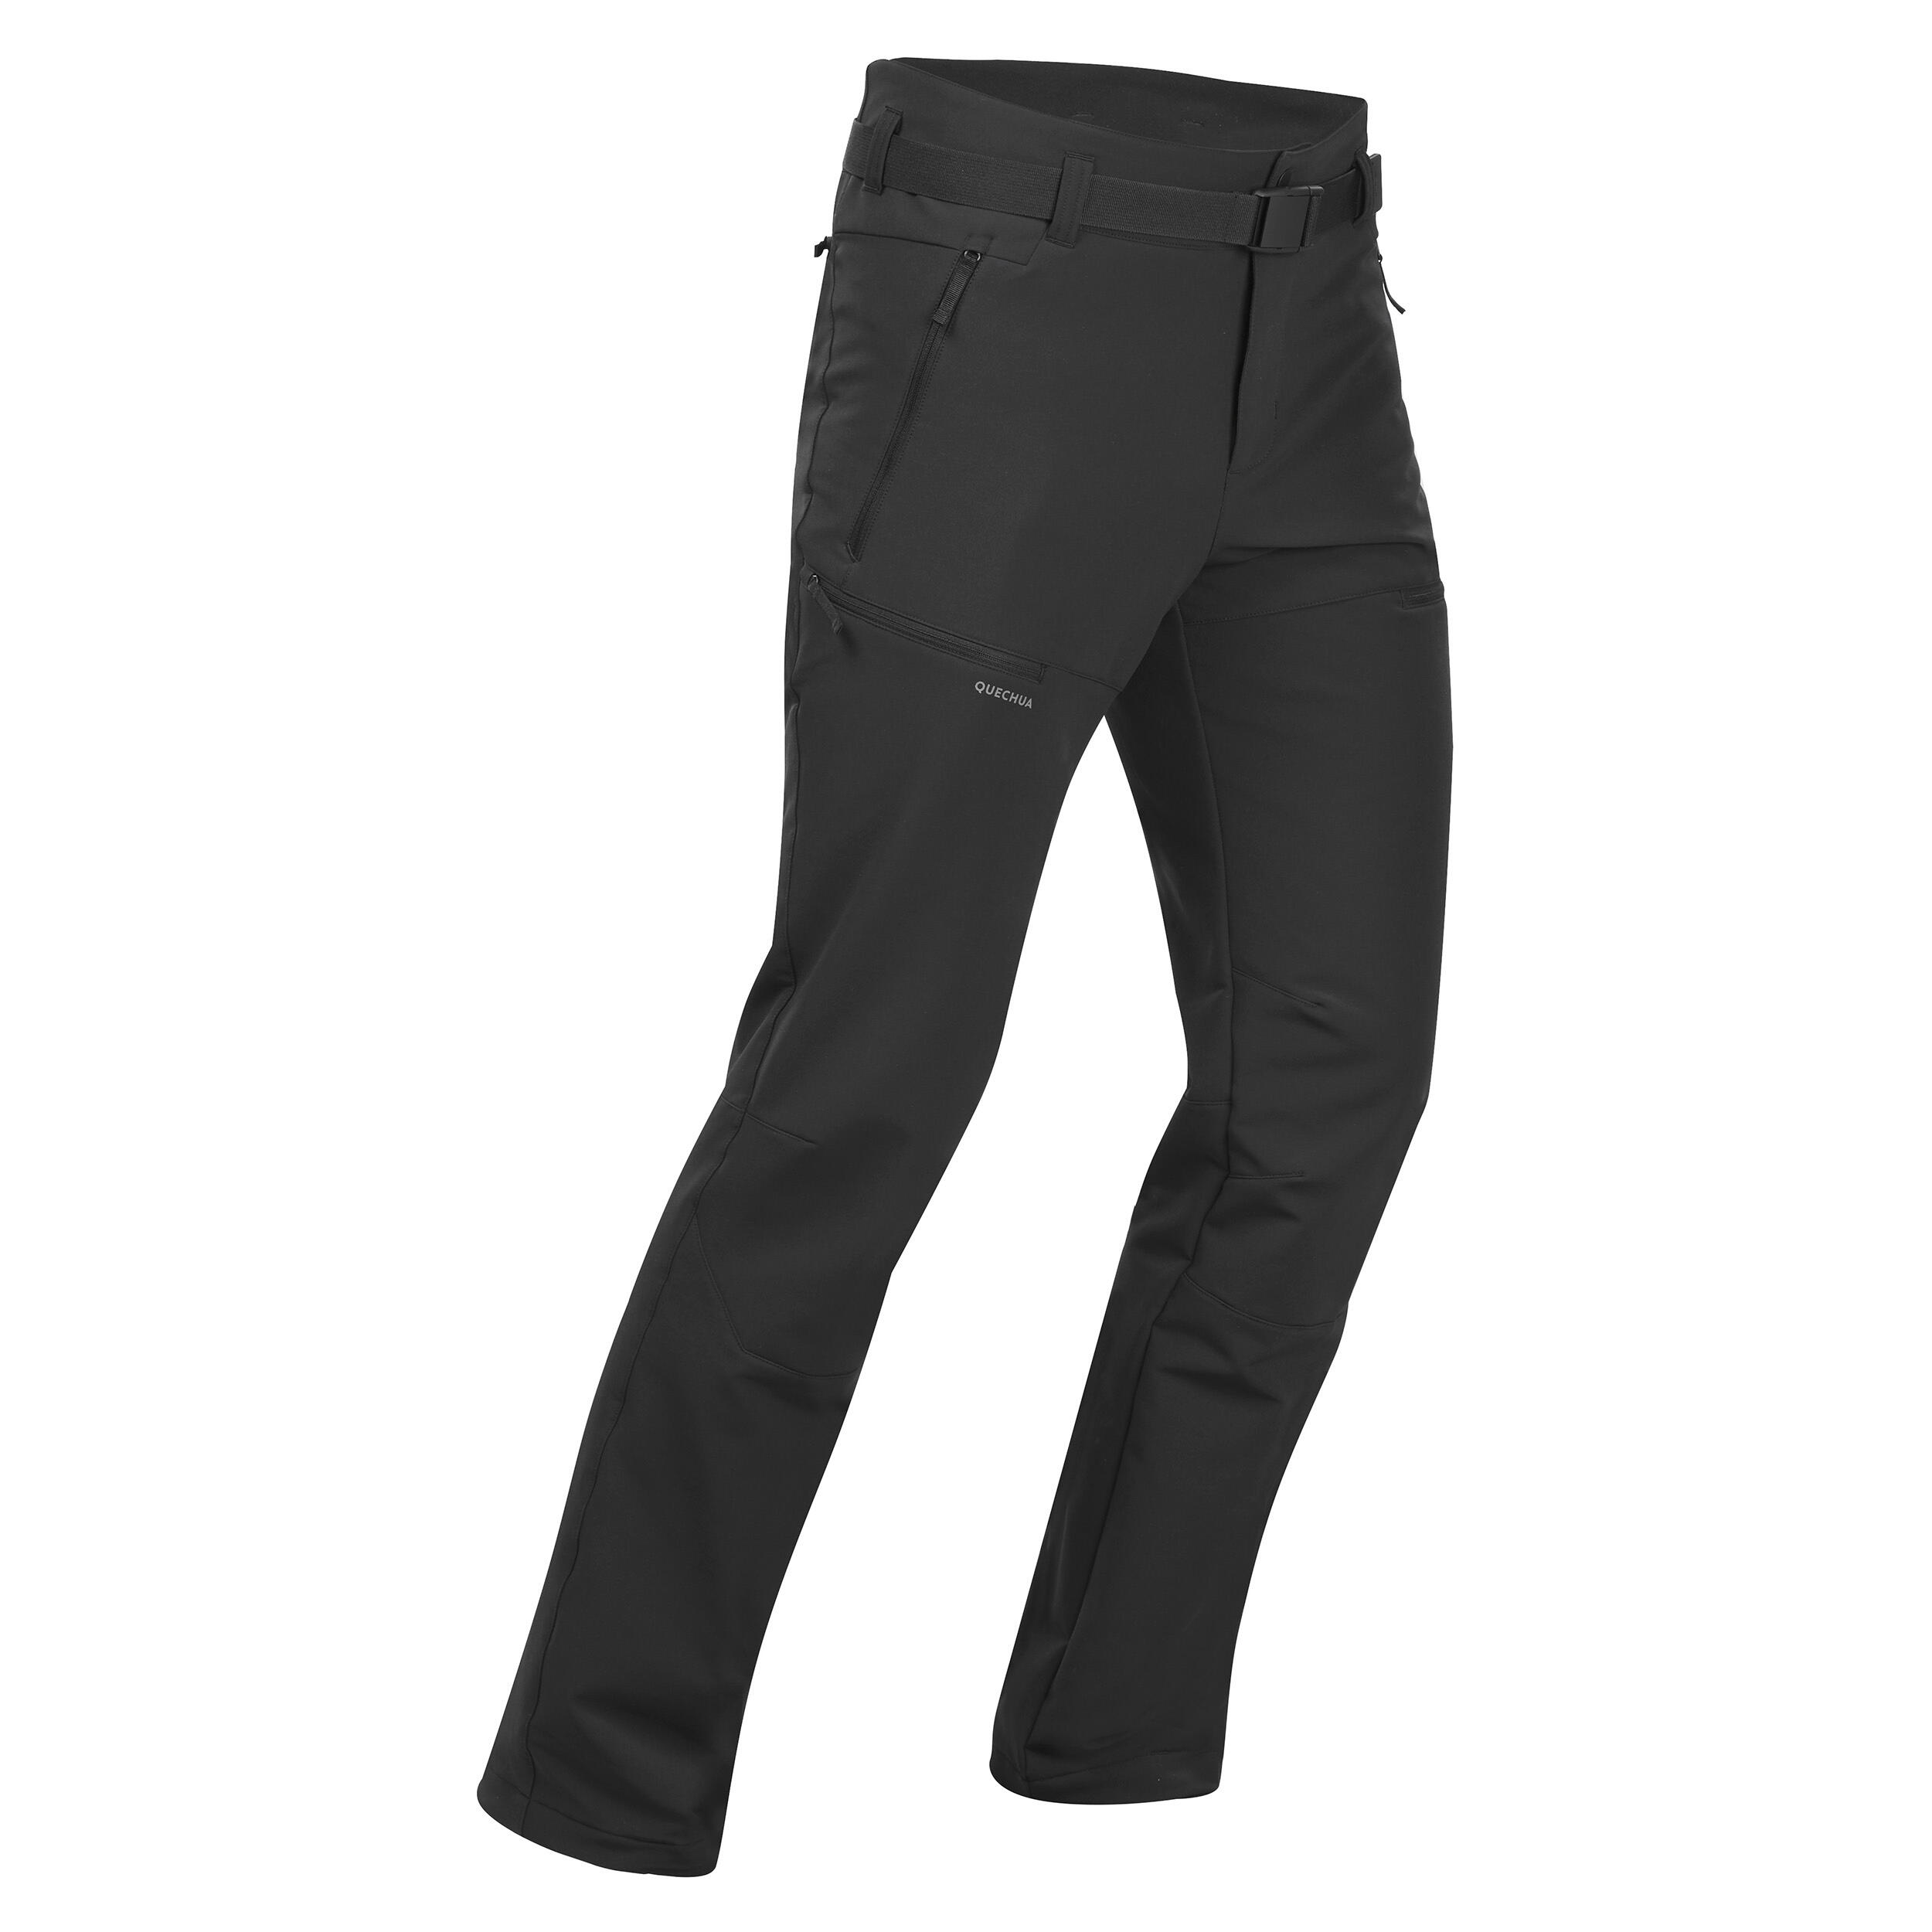 Buy Mens Waterproof Hiking Over Decathlon Trousers  NH500 Imper Hiking  Trekking Riding Over Trousers Black Color Decathlon Rain Pant SizeXL  Numerical Size36  Street Studio at Amazonin